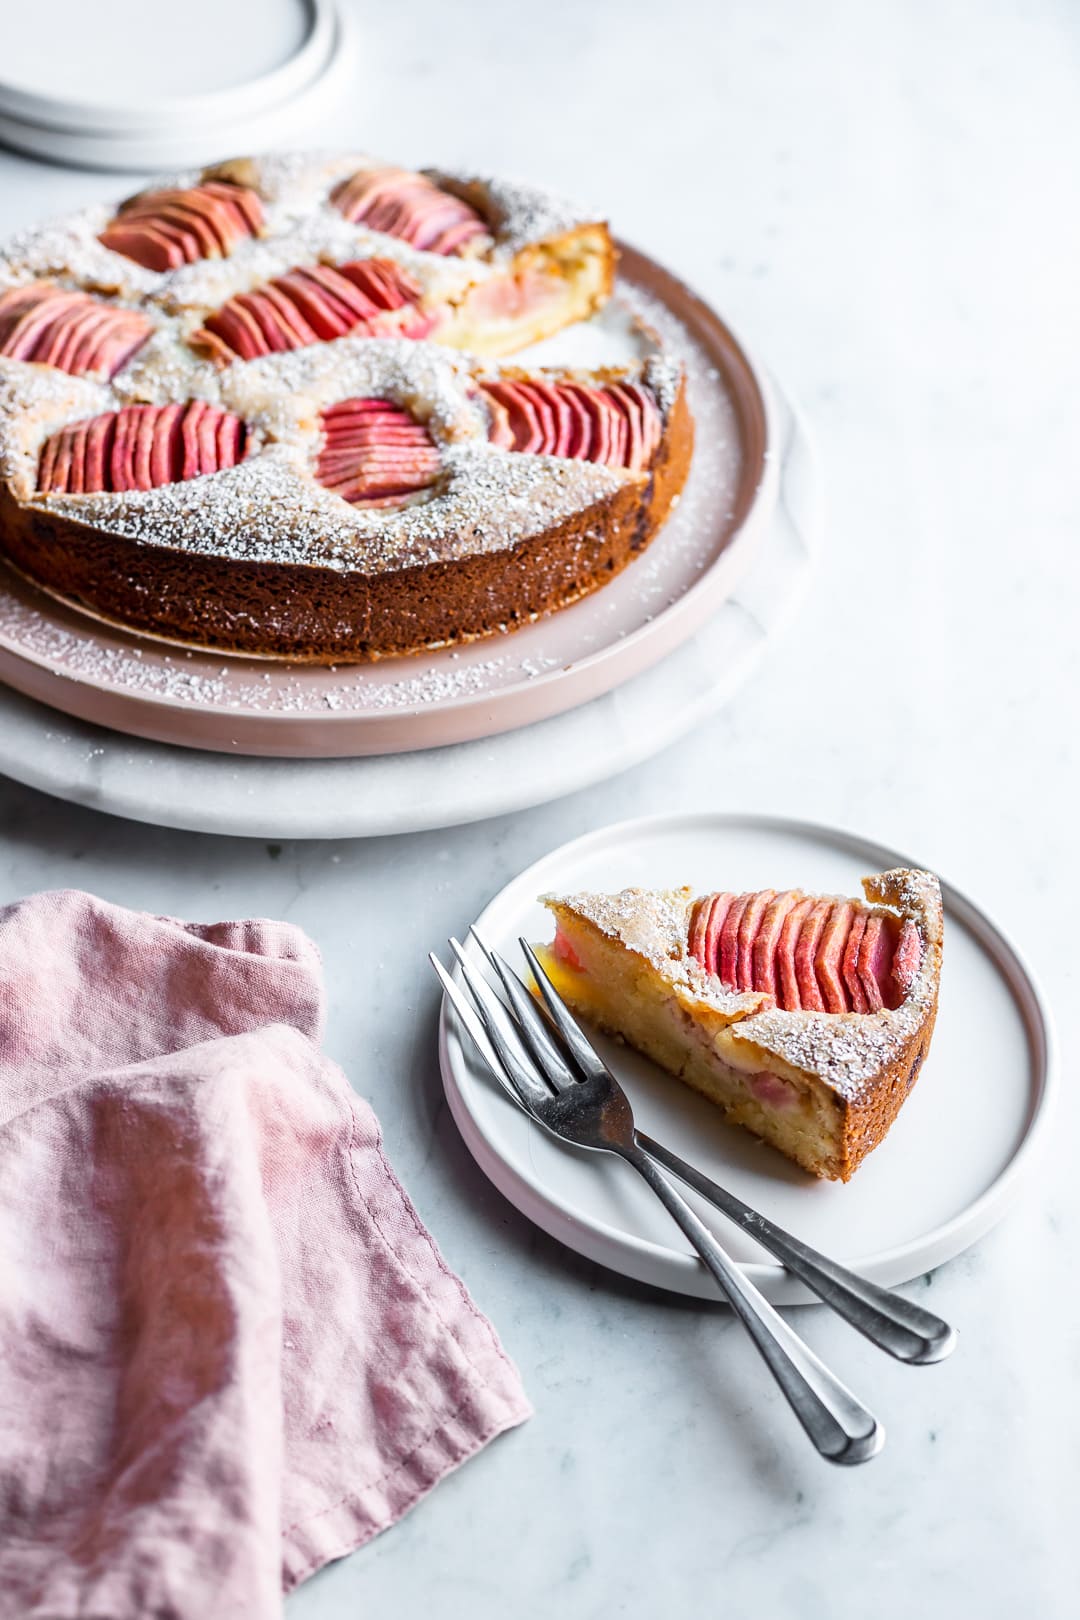 Slice of almond cake with pink apples with rest of cake in background